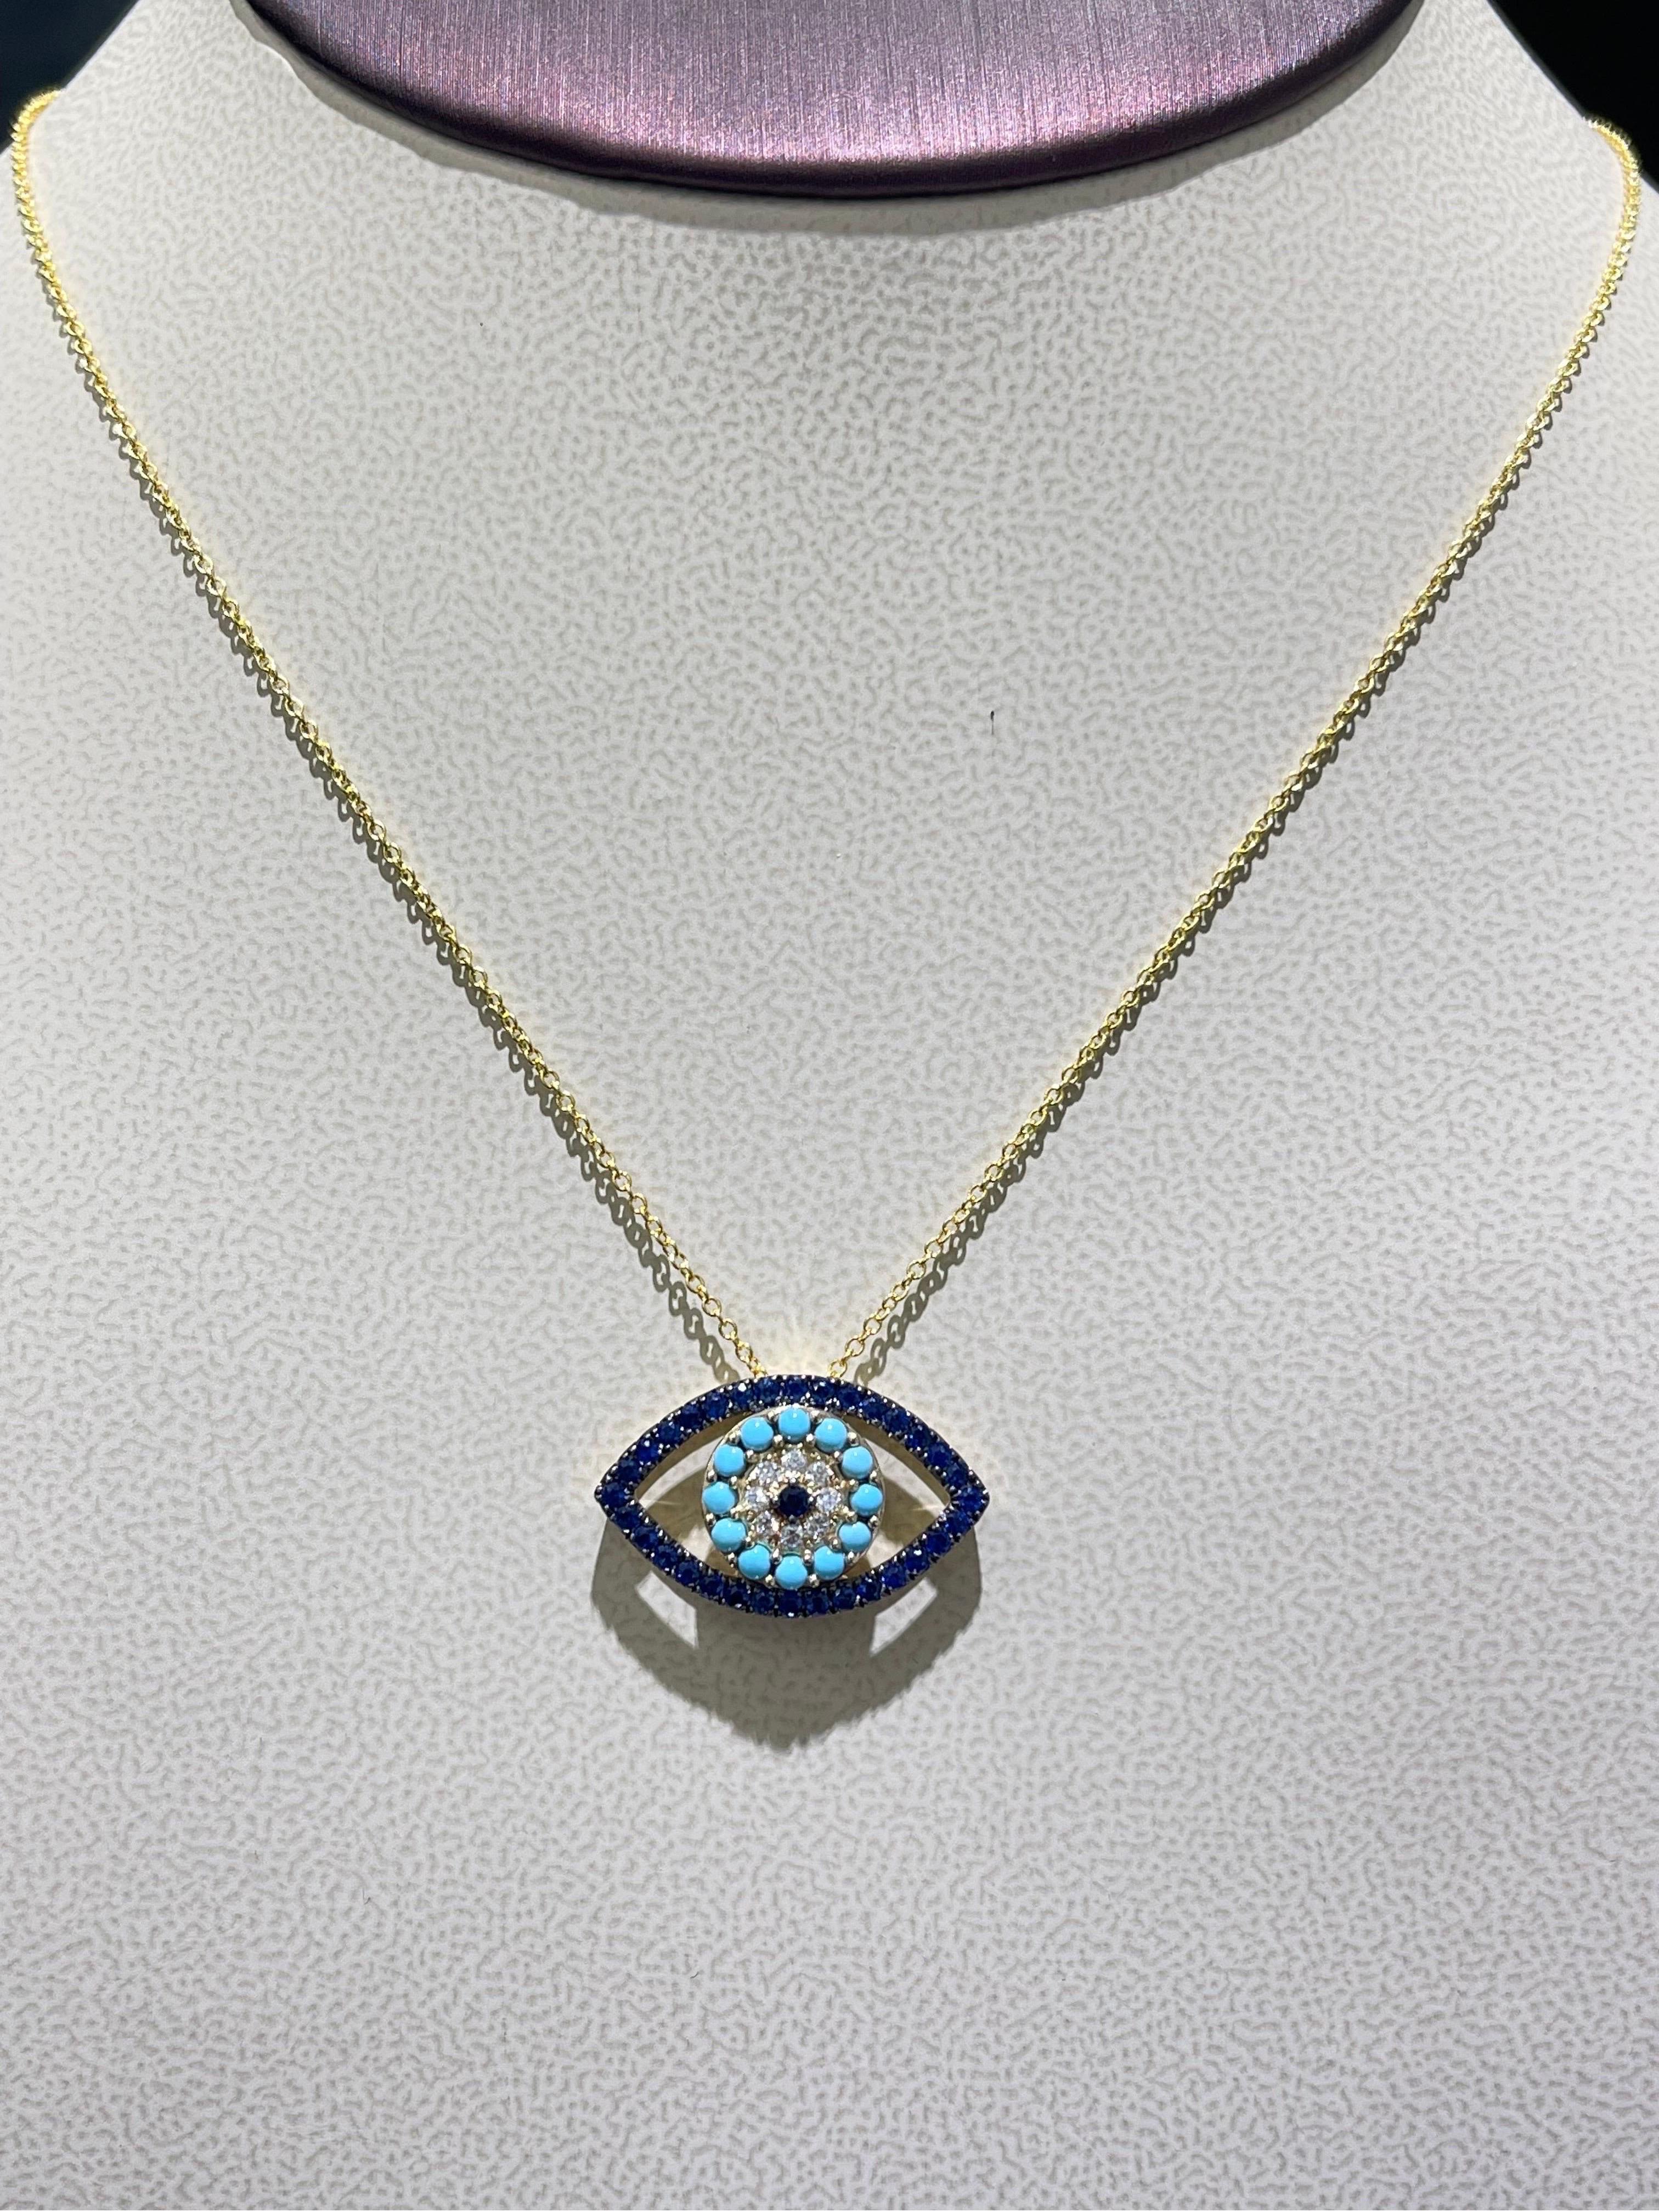 Beautiful Sapphire, Turquoise & Diamond Devil Eye Necklace In 14k.

- 0.11 carats in diamonds,

- 1.1 carats in blue sapphires & turquoise,

- length is adjustable 18” or 16”,

- width of the Eye is 1”,

Retail $3,874